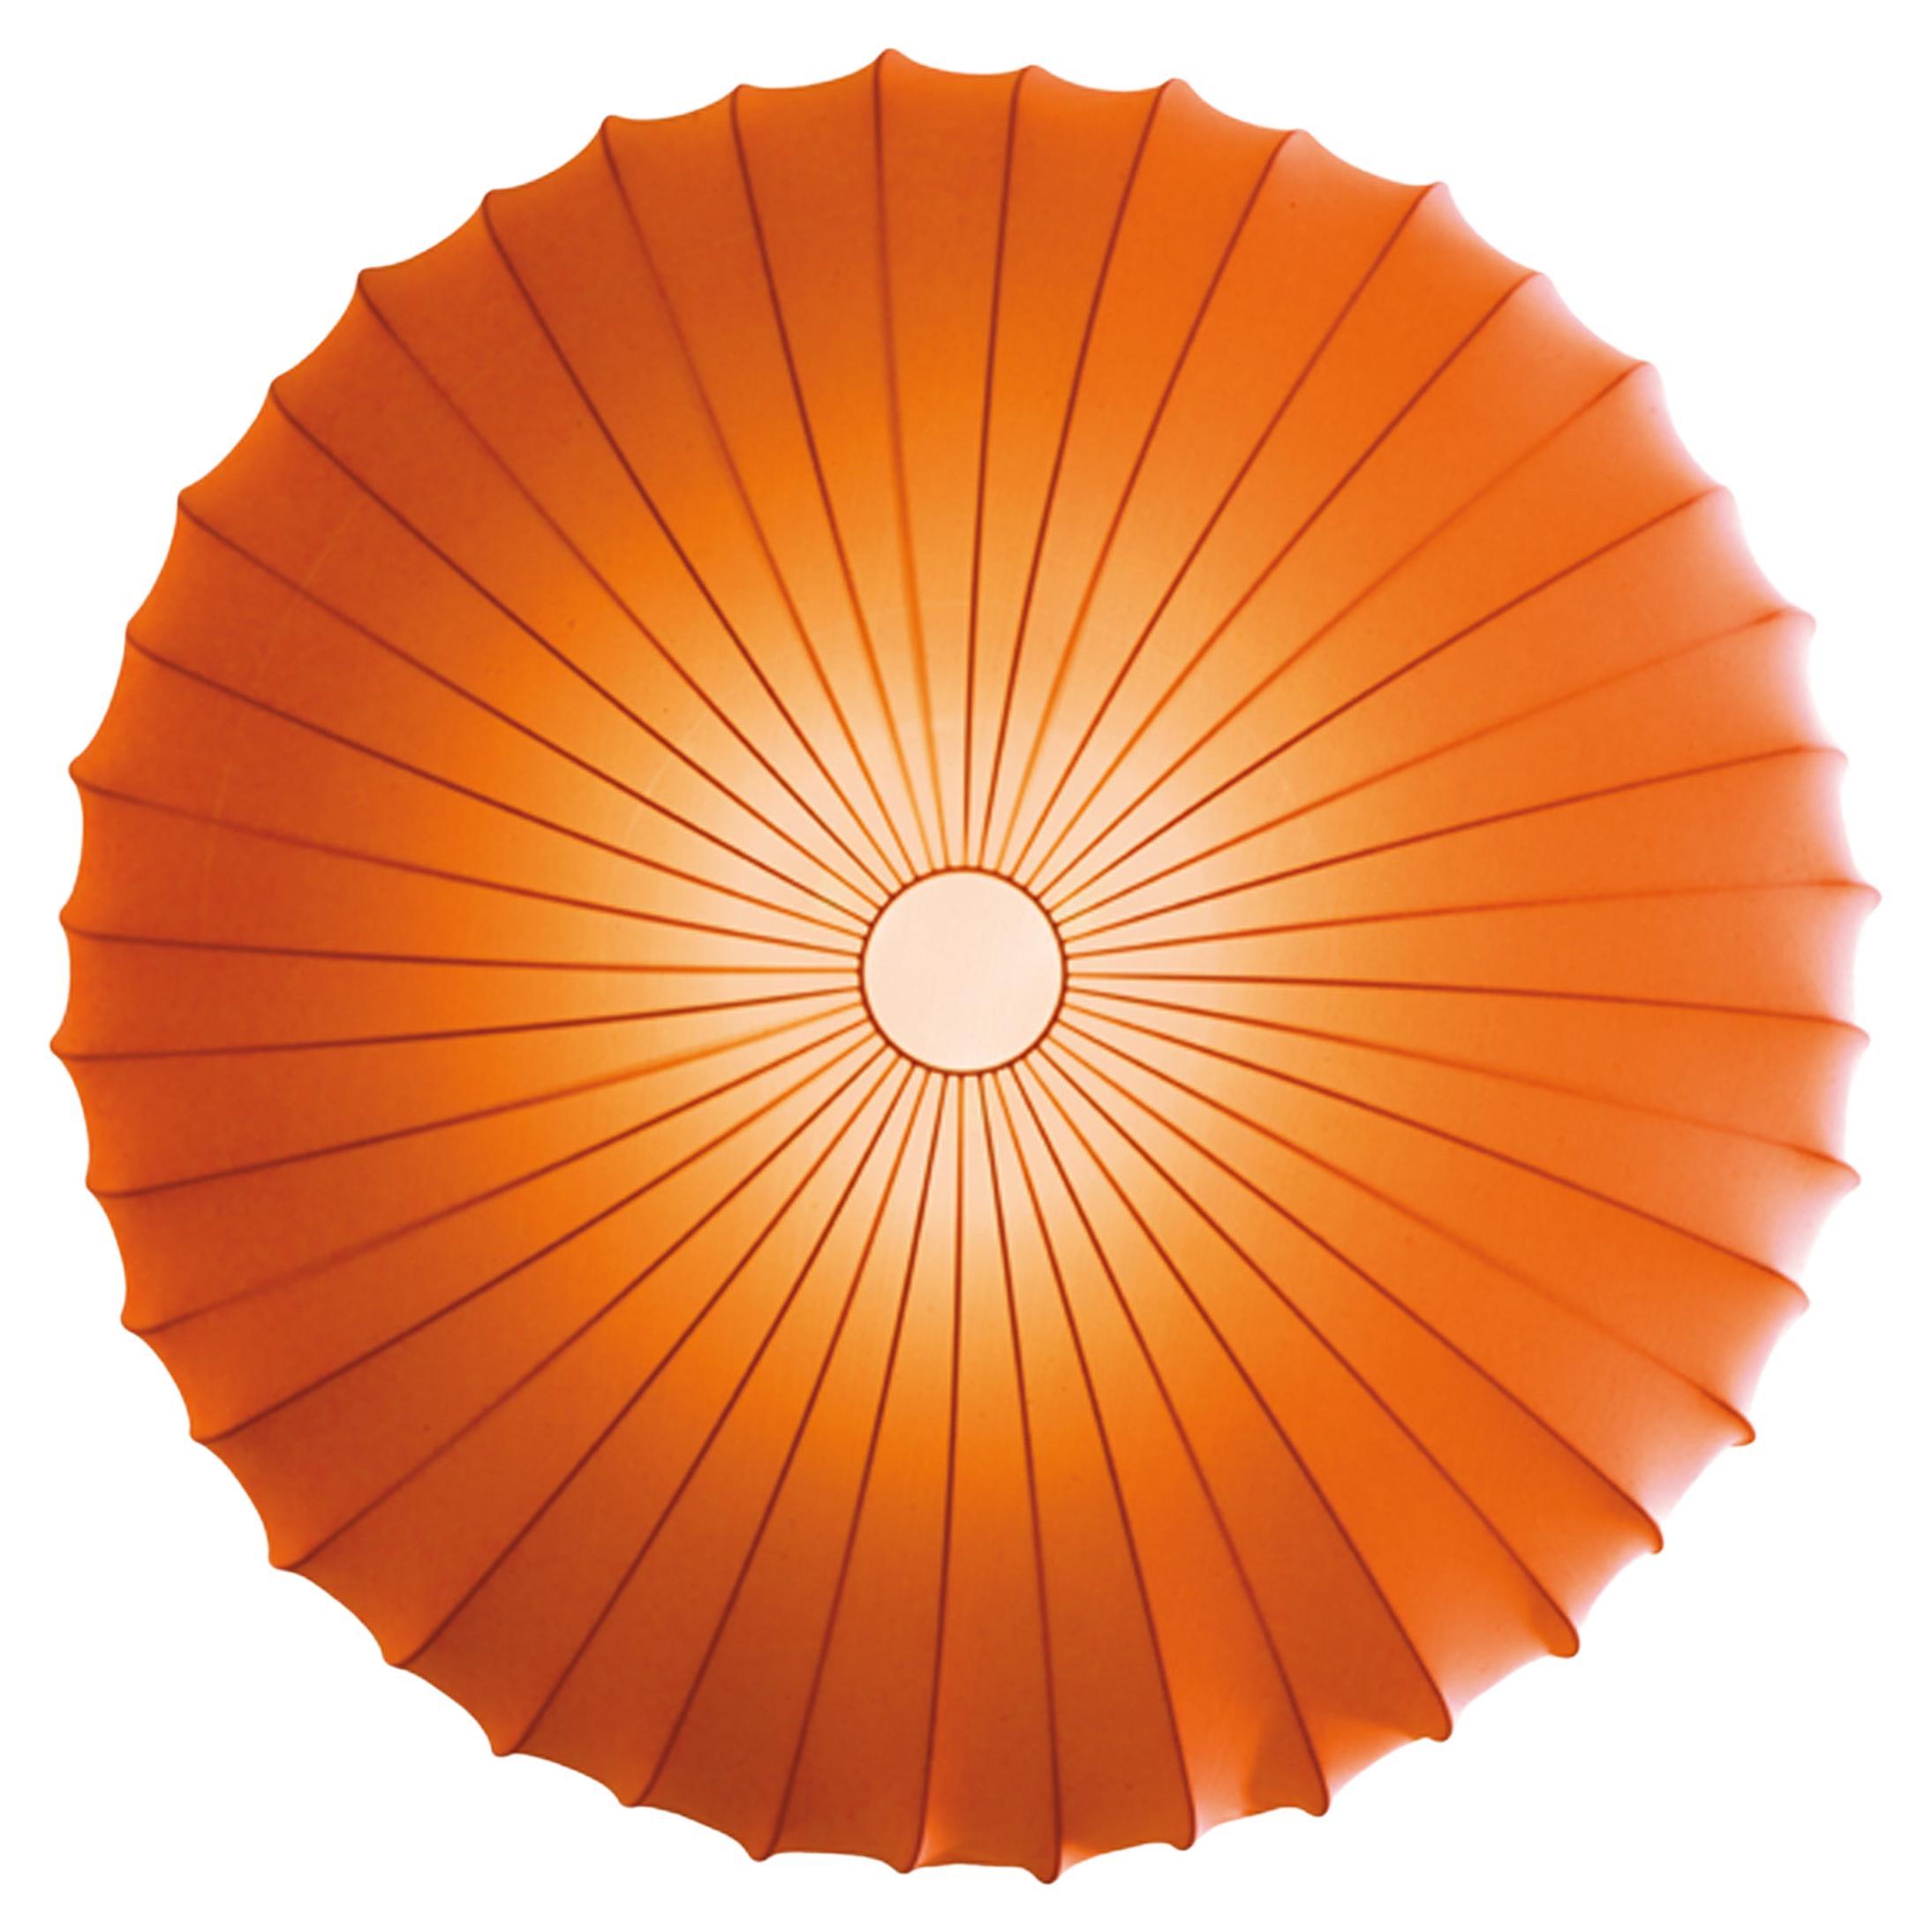 Axolight Muse Large Ceiling Light in Orange with White Metal Finish